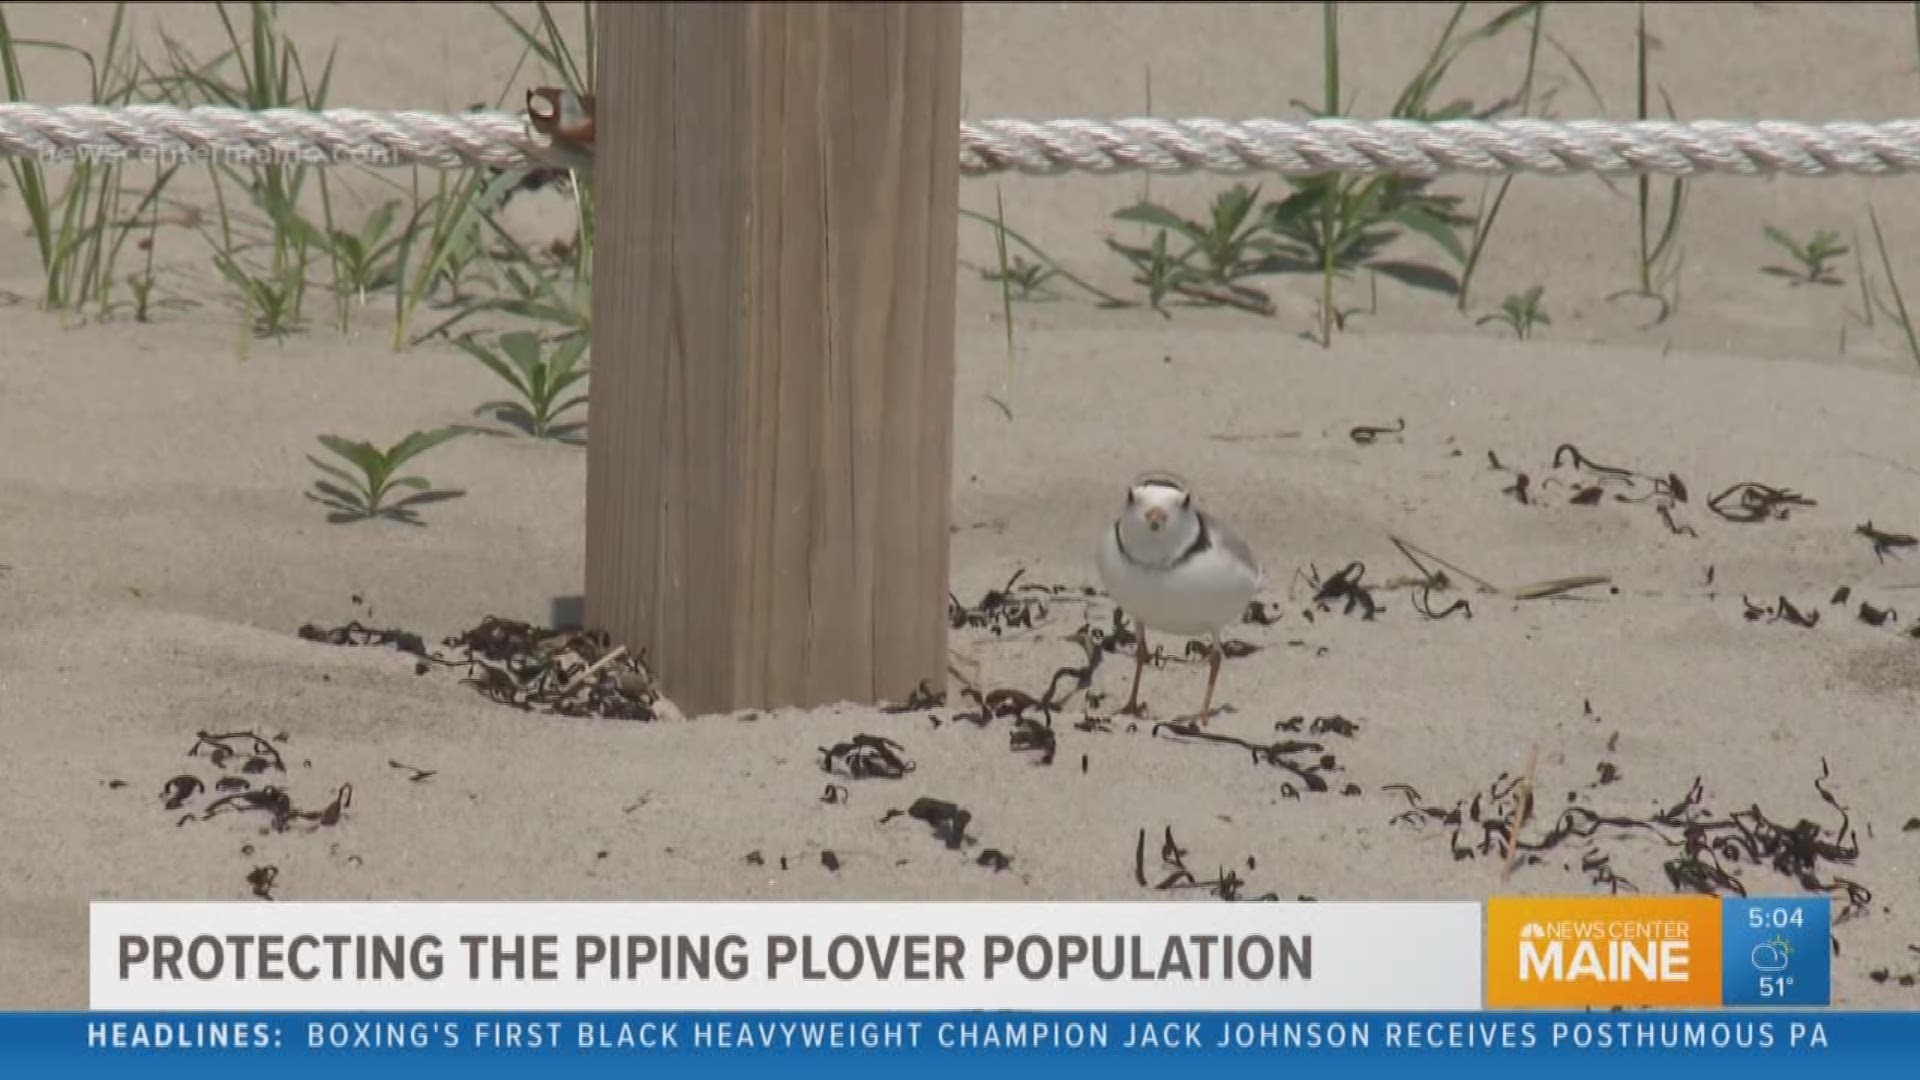 Good beach etiquette is essential to protect Maine's vulnerable population of piping plovers